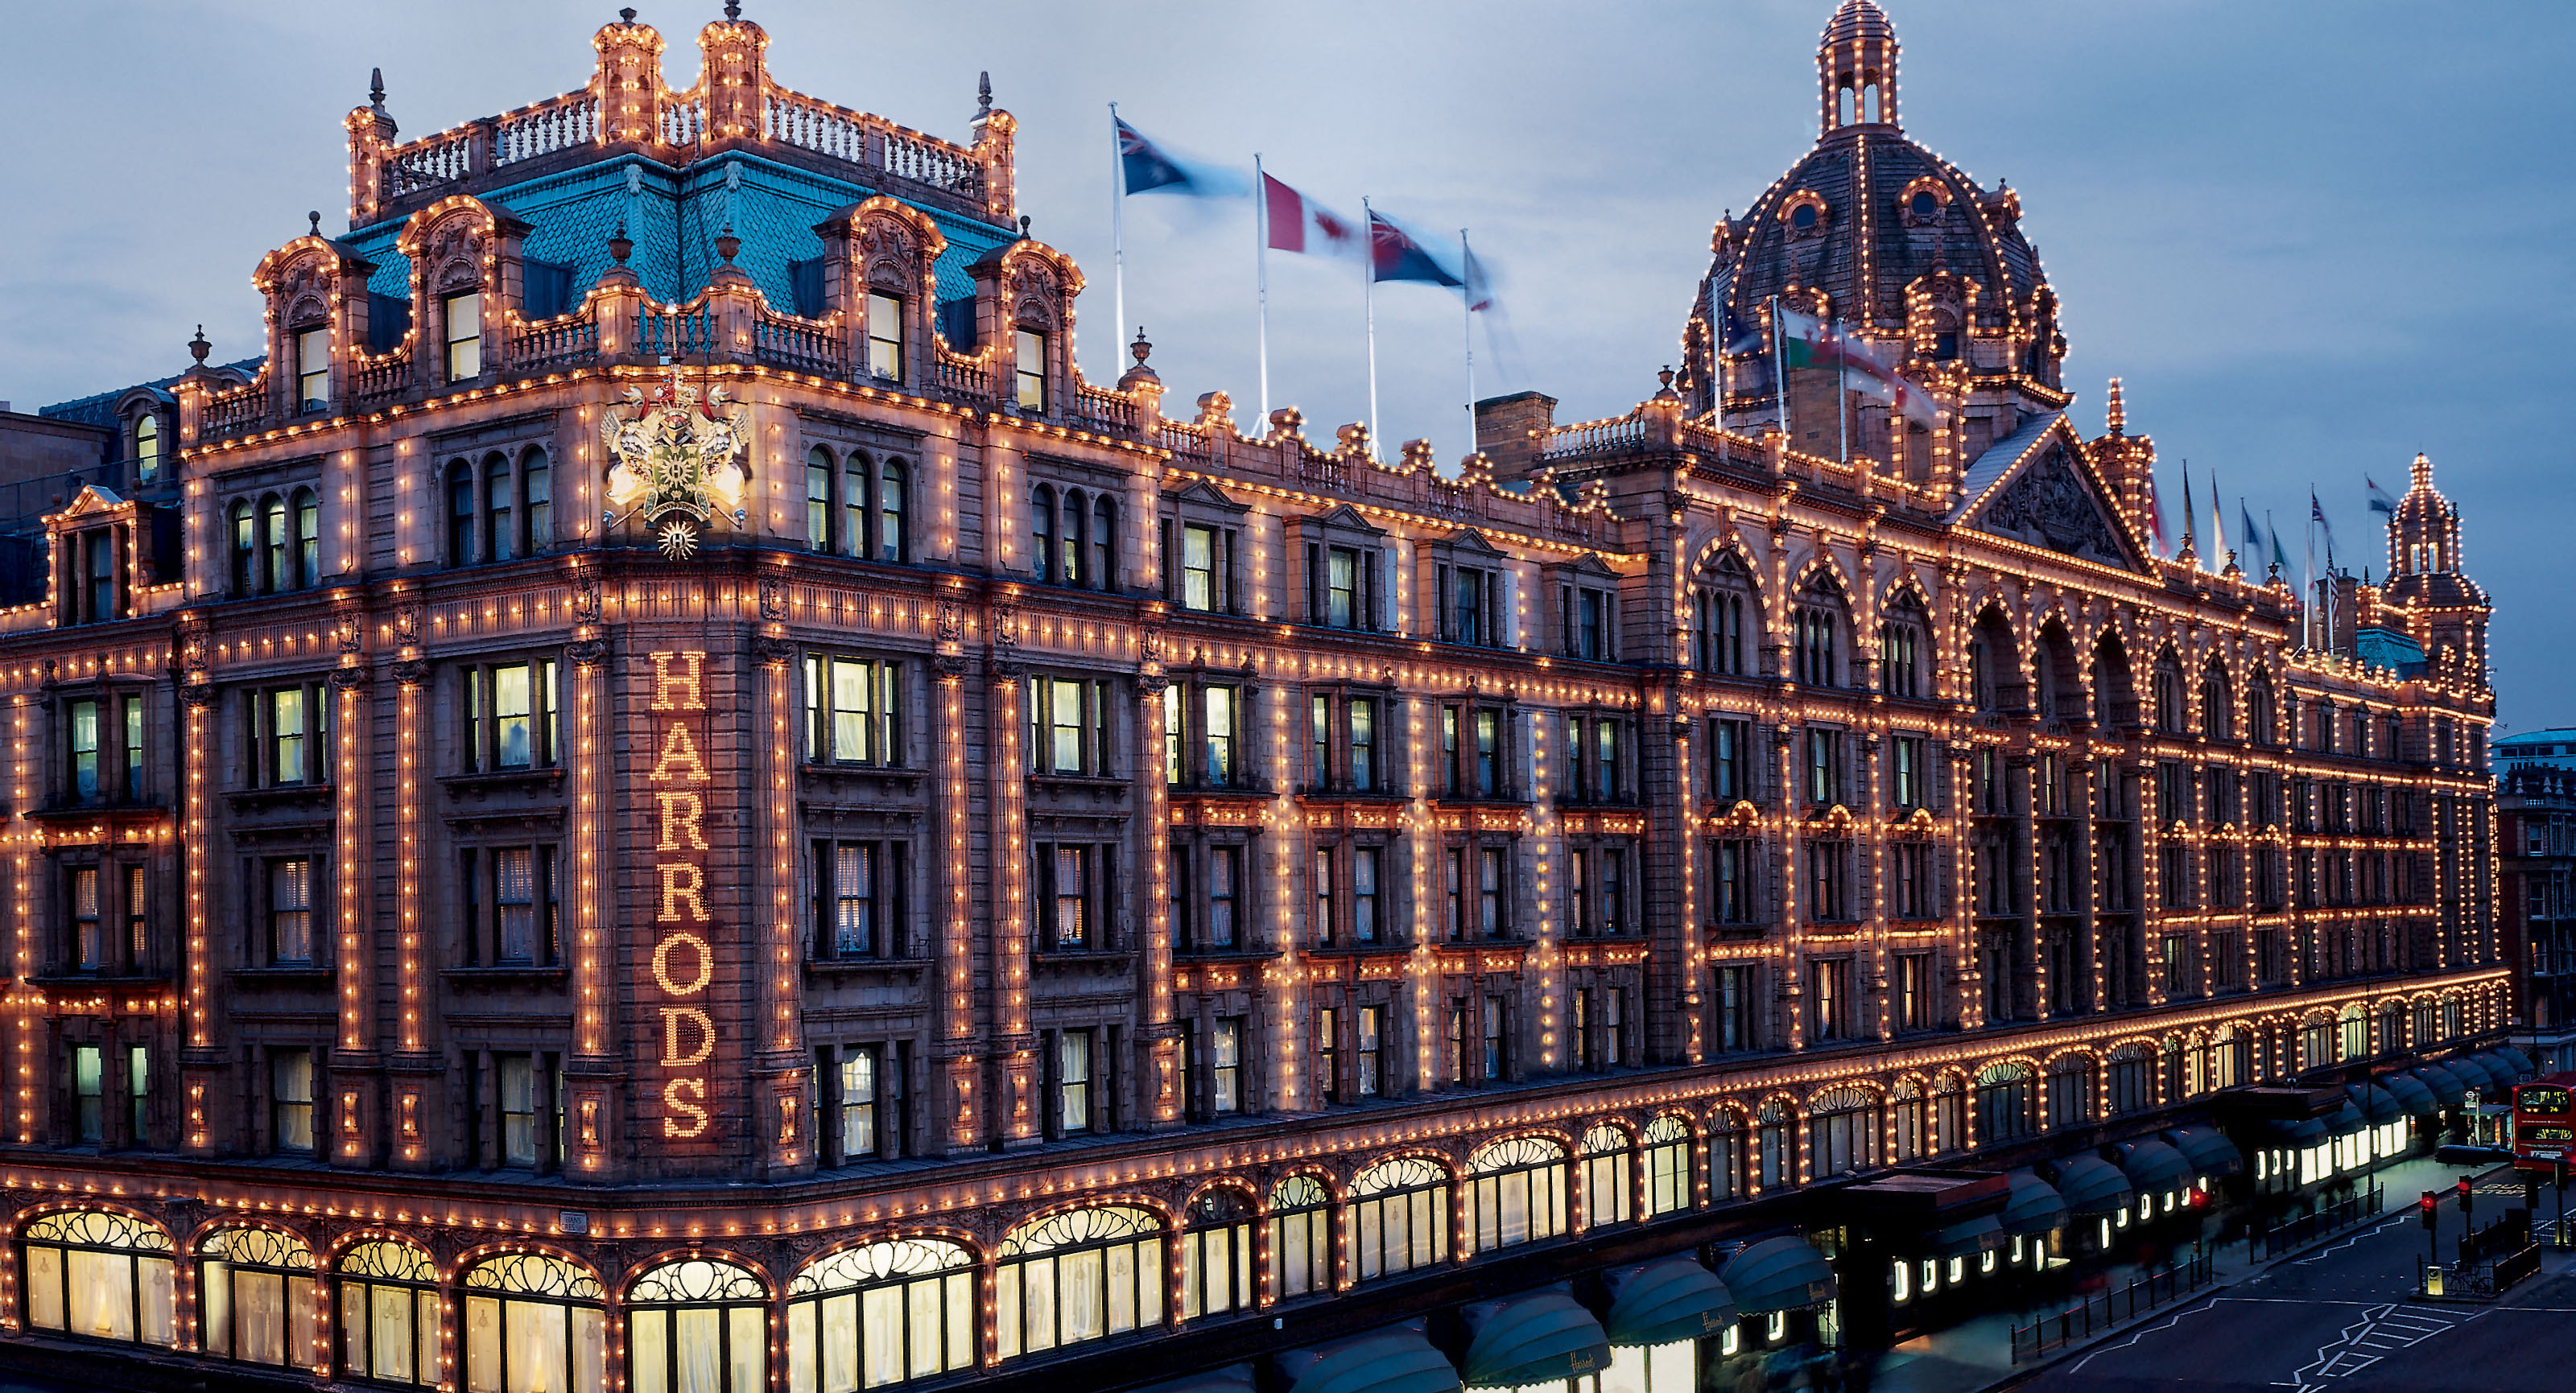 We invite you to see why Harrods is the most exclusive mall in London